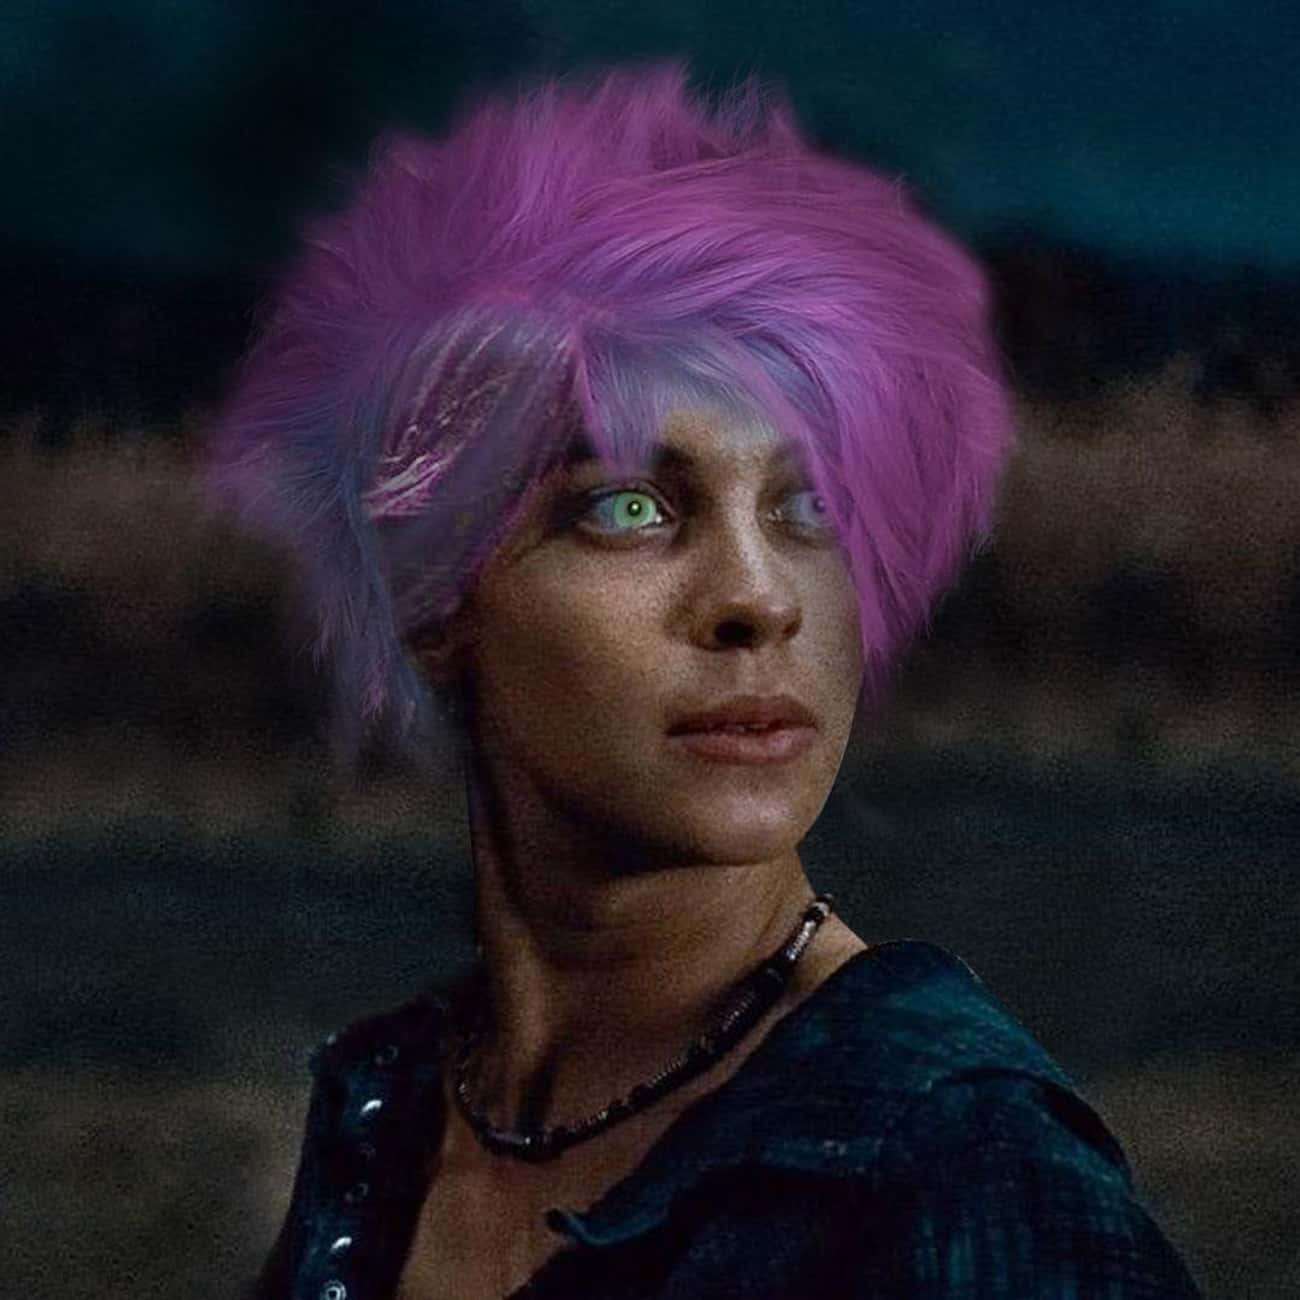 Tonks In The Books: Short Haired, Very Vibrant And Edgy